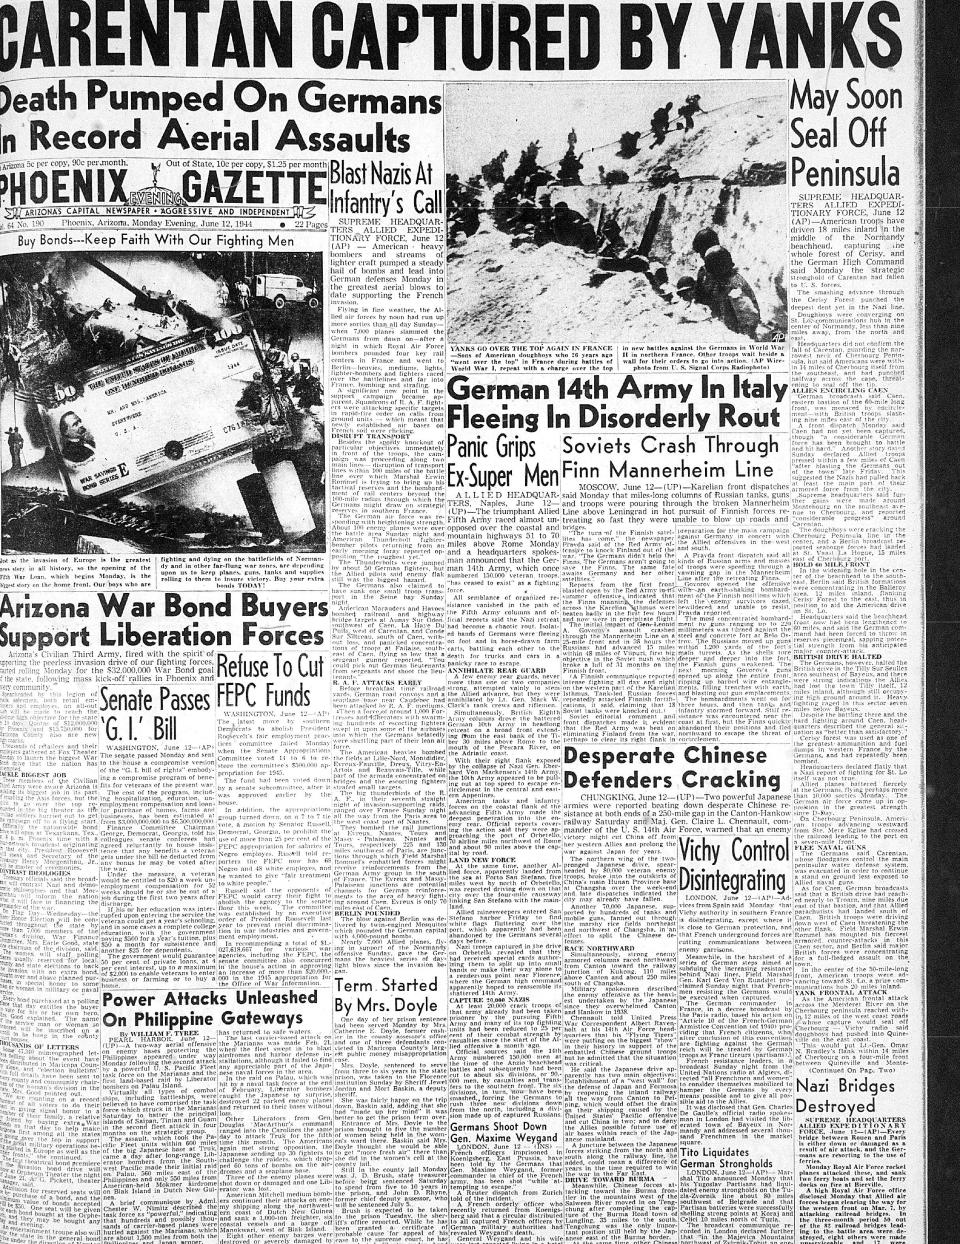 The front page of the Phoenix Gazette from June 12, 1944.